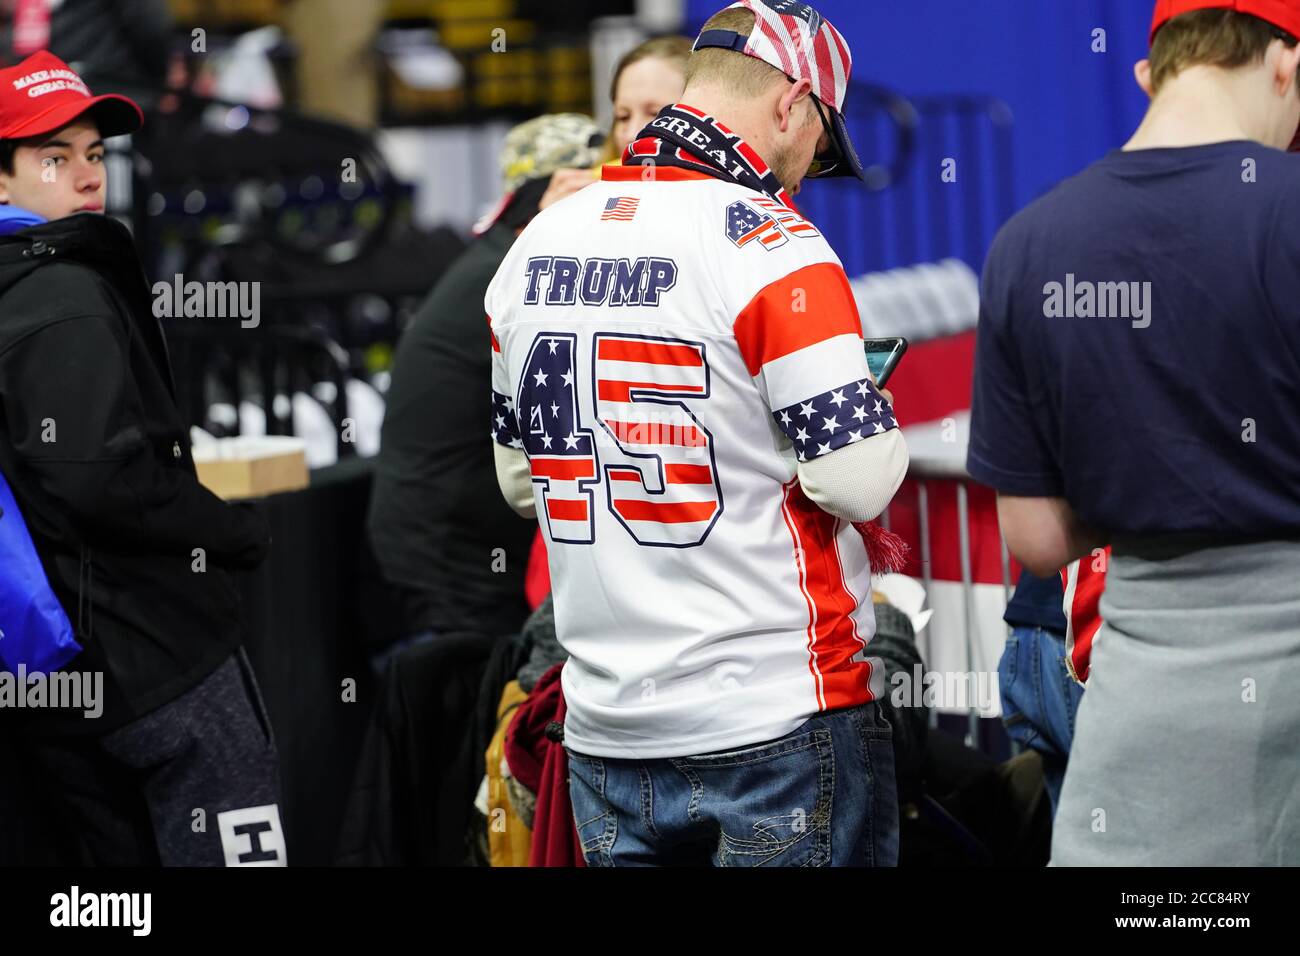 45th President Donald Trump supporters wear number 45 Jersey shirt to support the President of USA at UW- Milwaukee Panther Arena. MAGA Rally Stock Photo